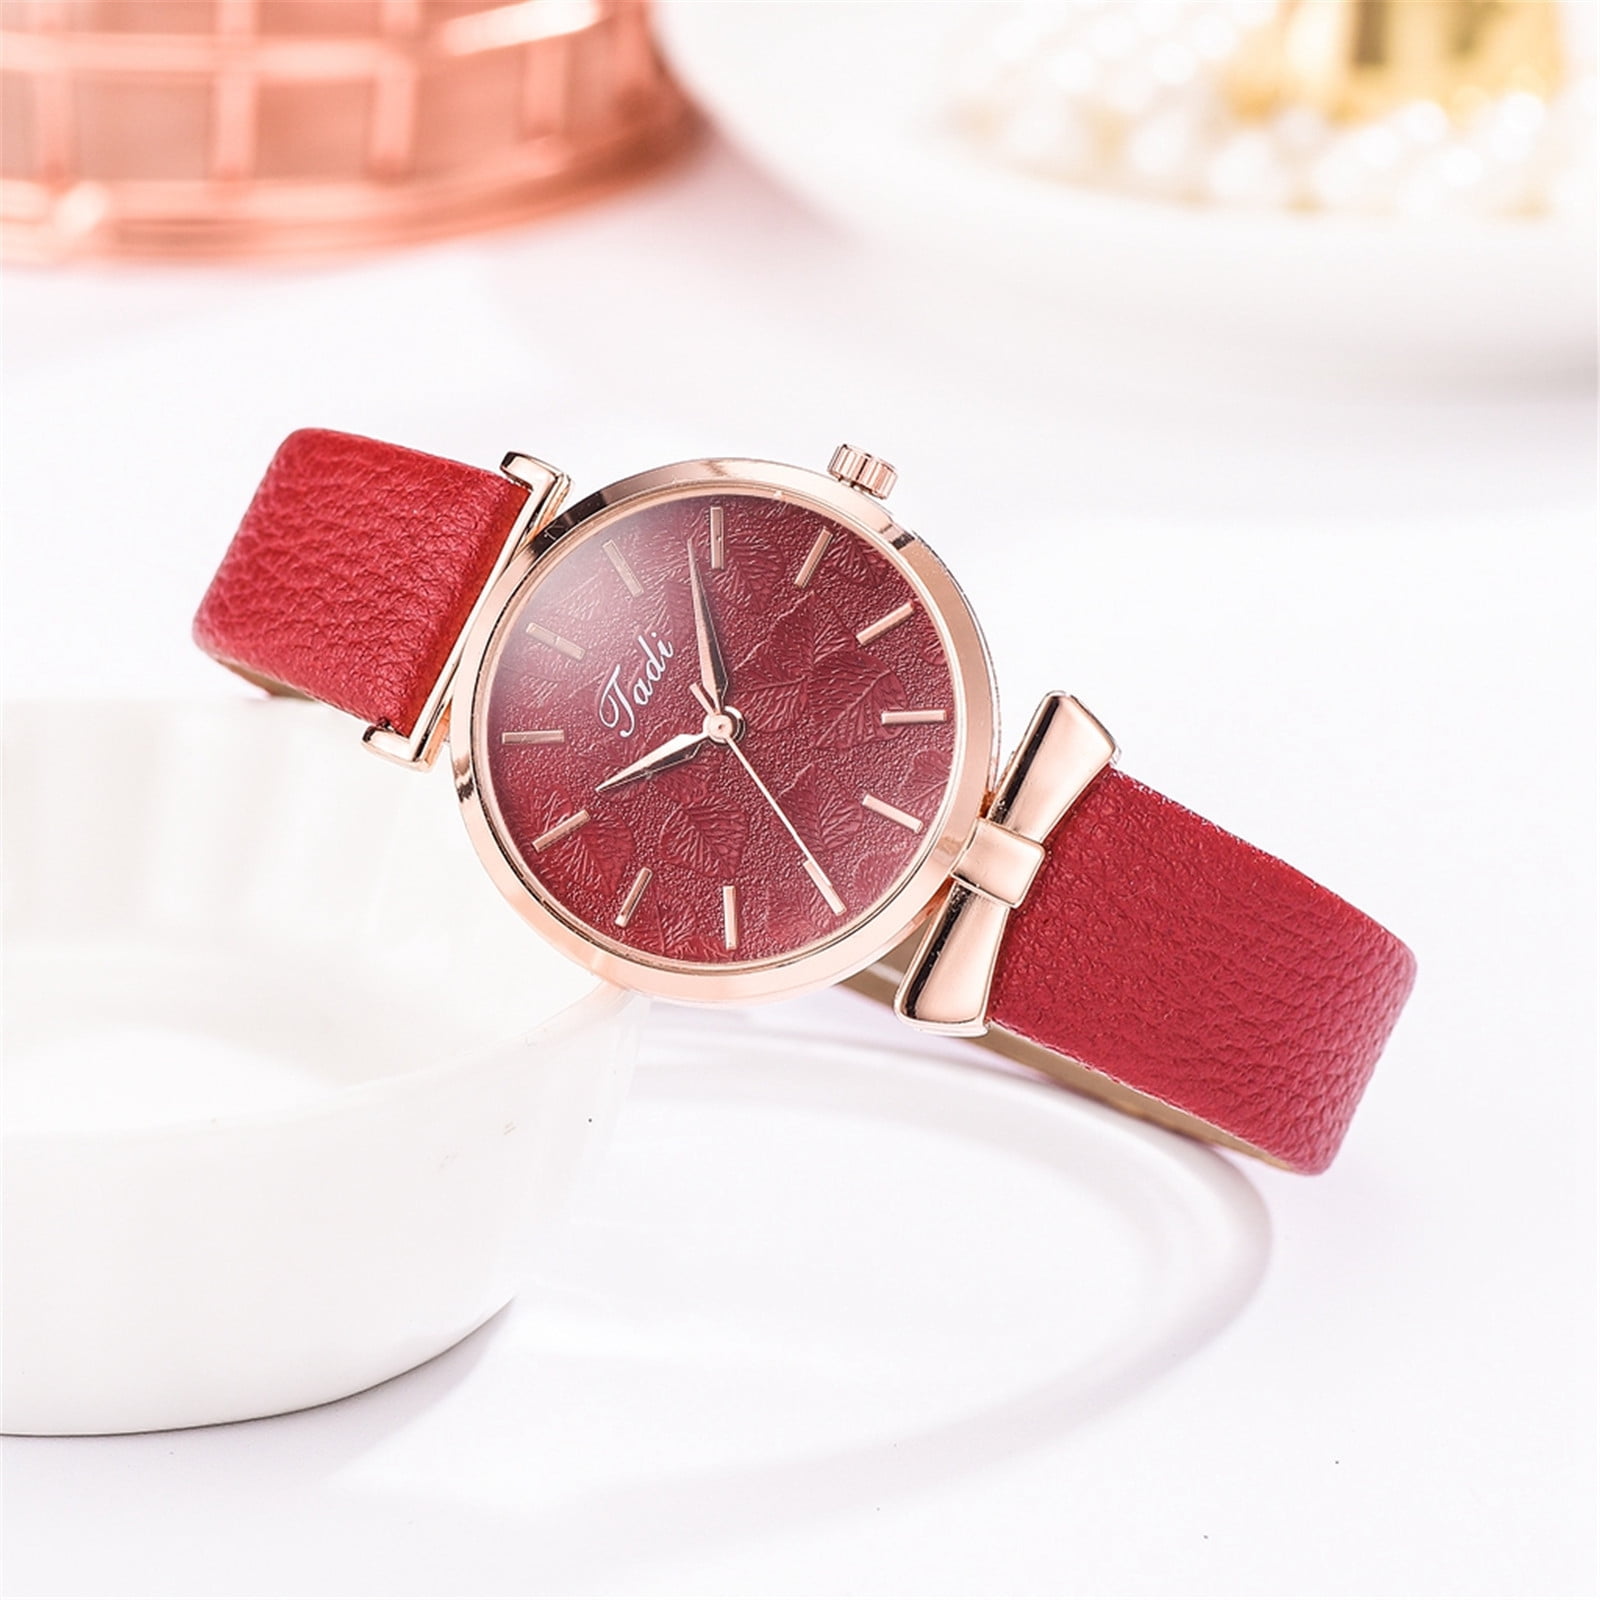  OUPINKE Diamond Watches for Womens Luxury Red Leather